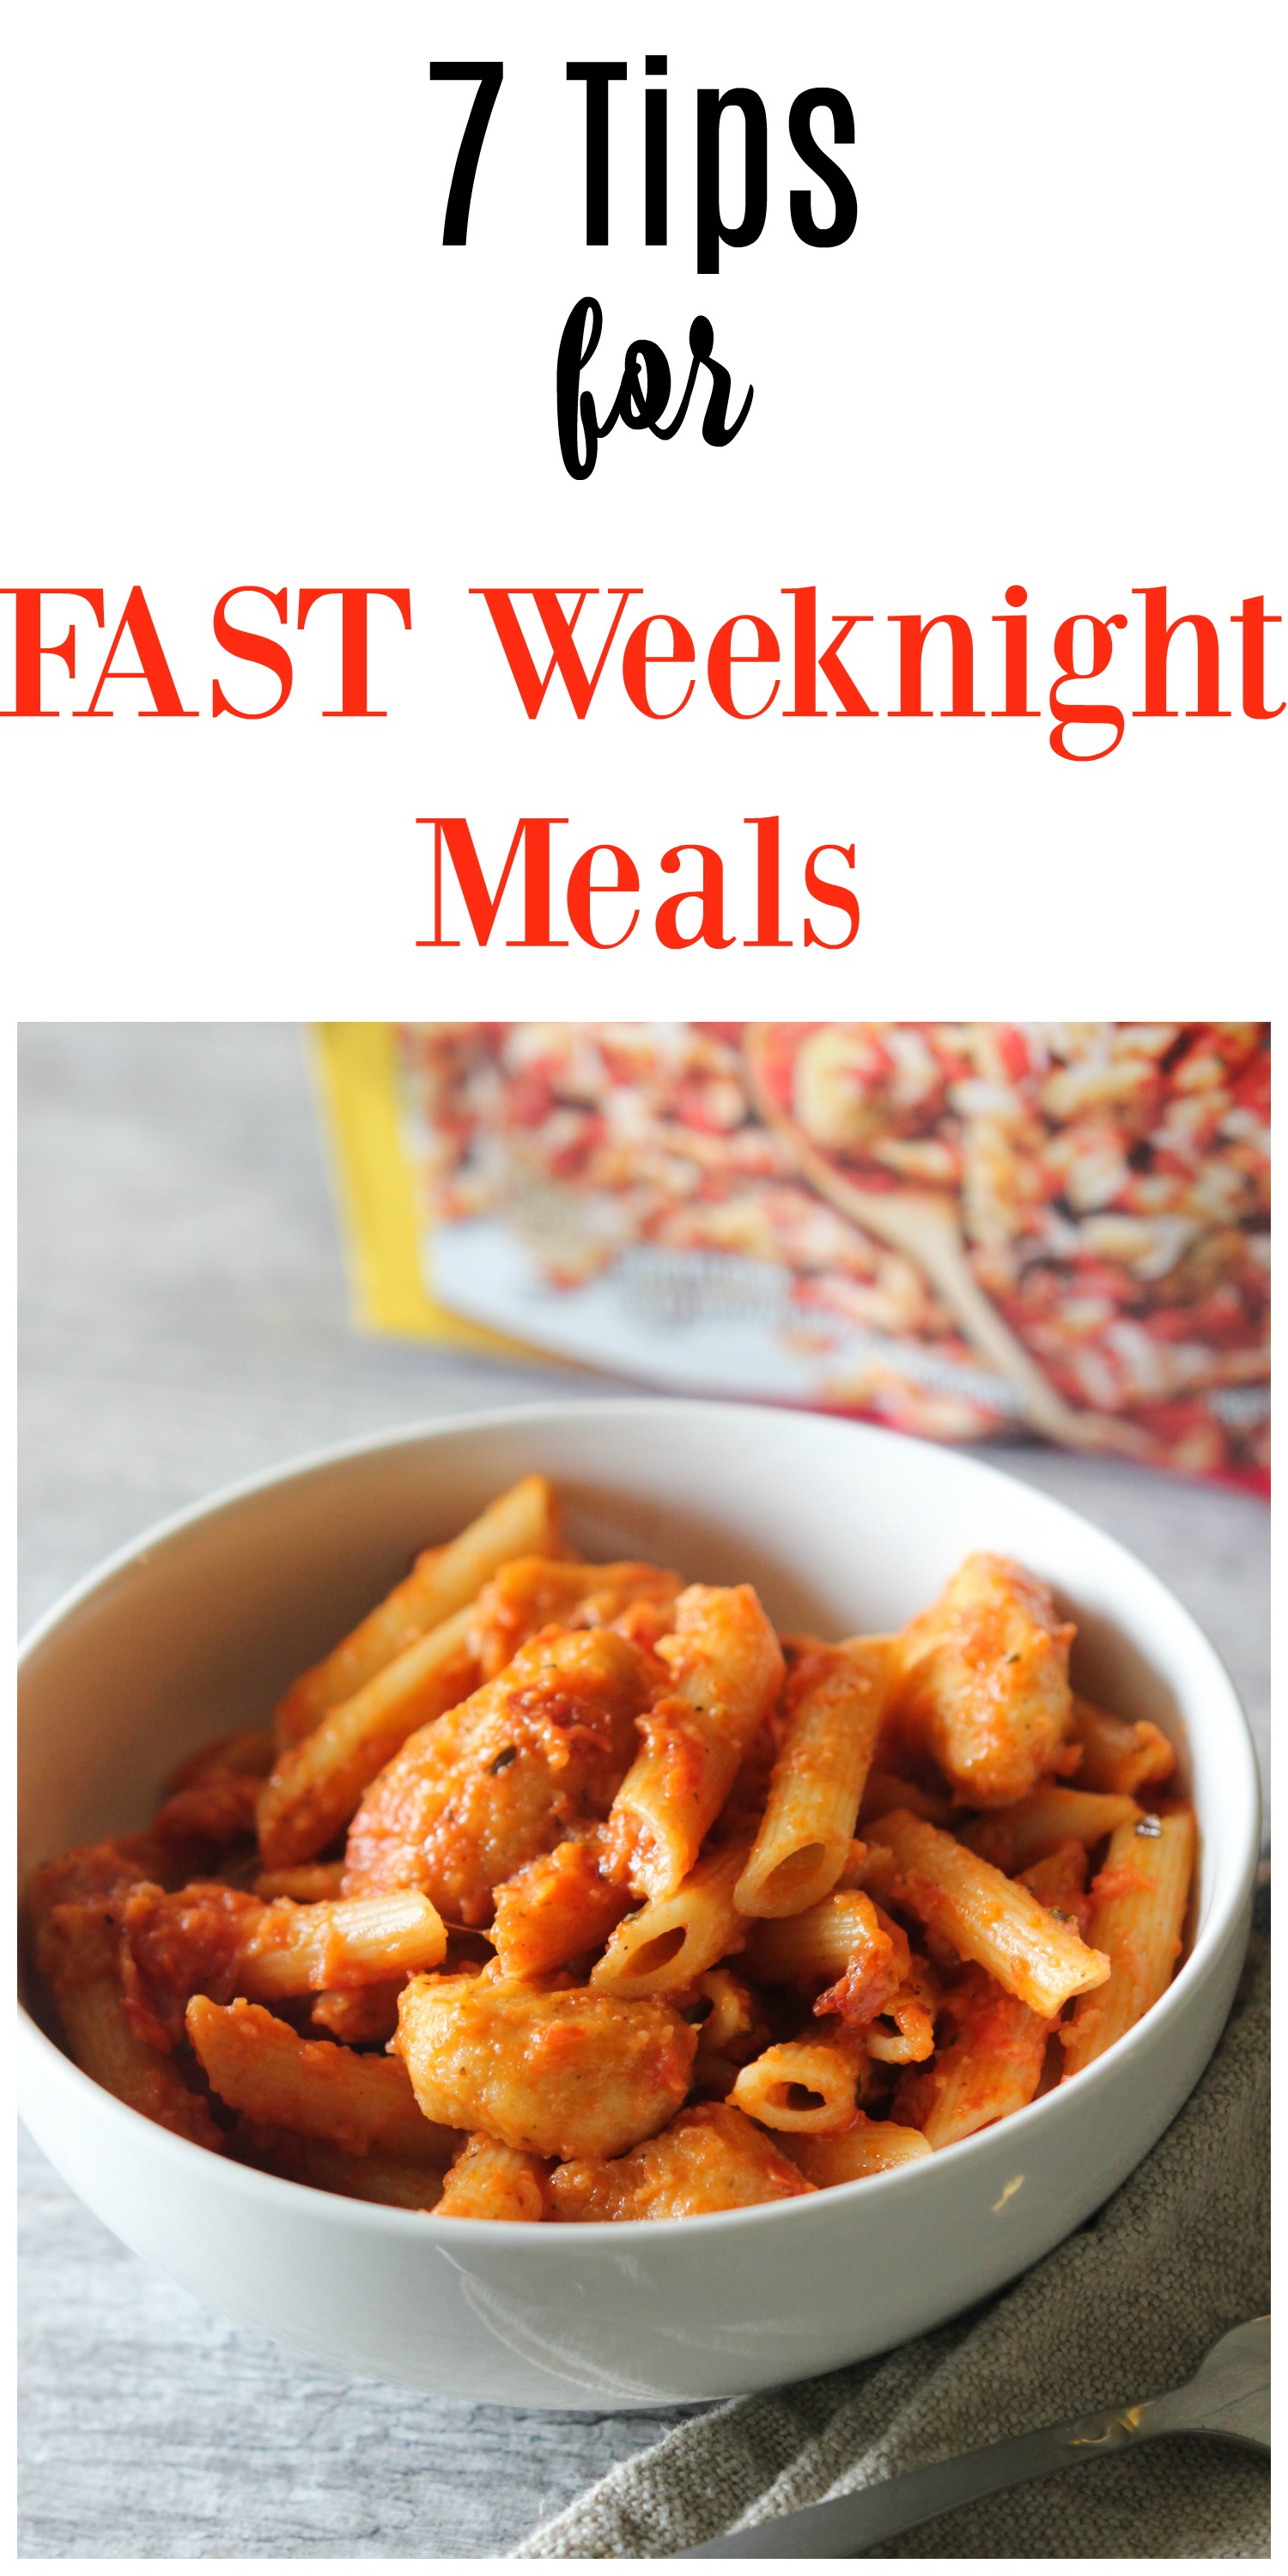 7 tips for fast weeknight meals